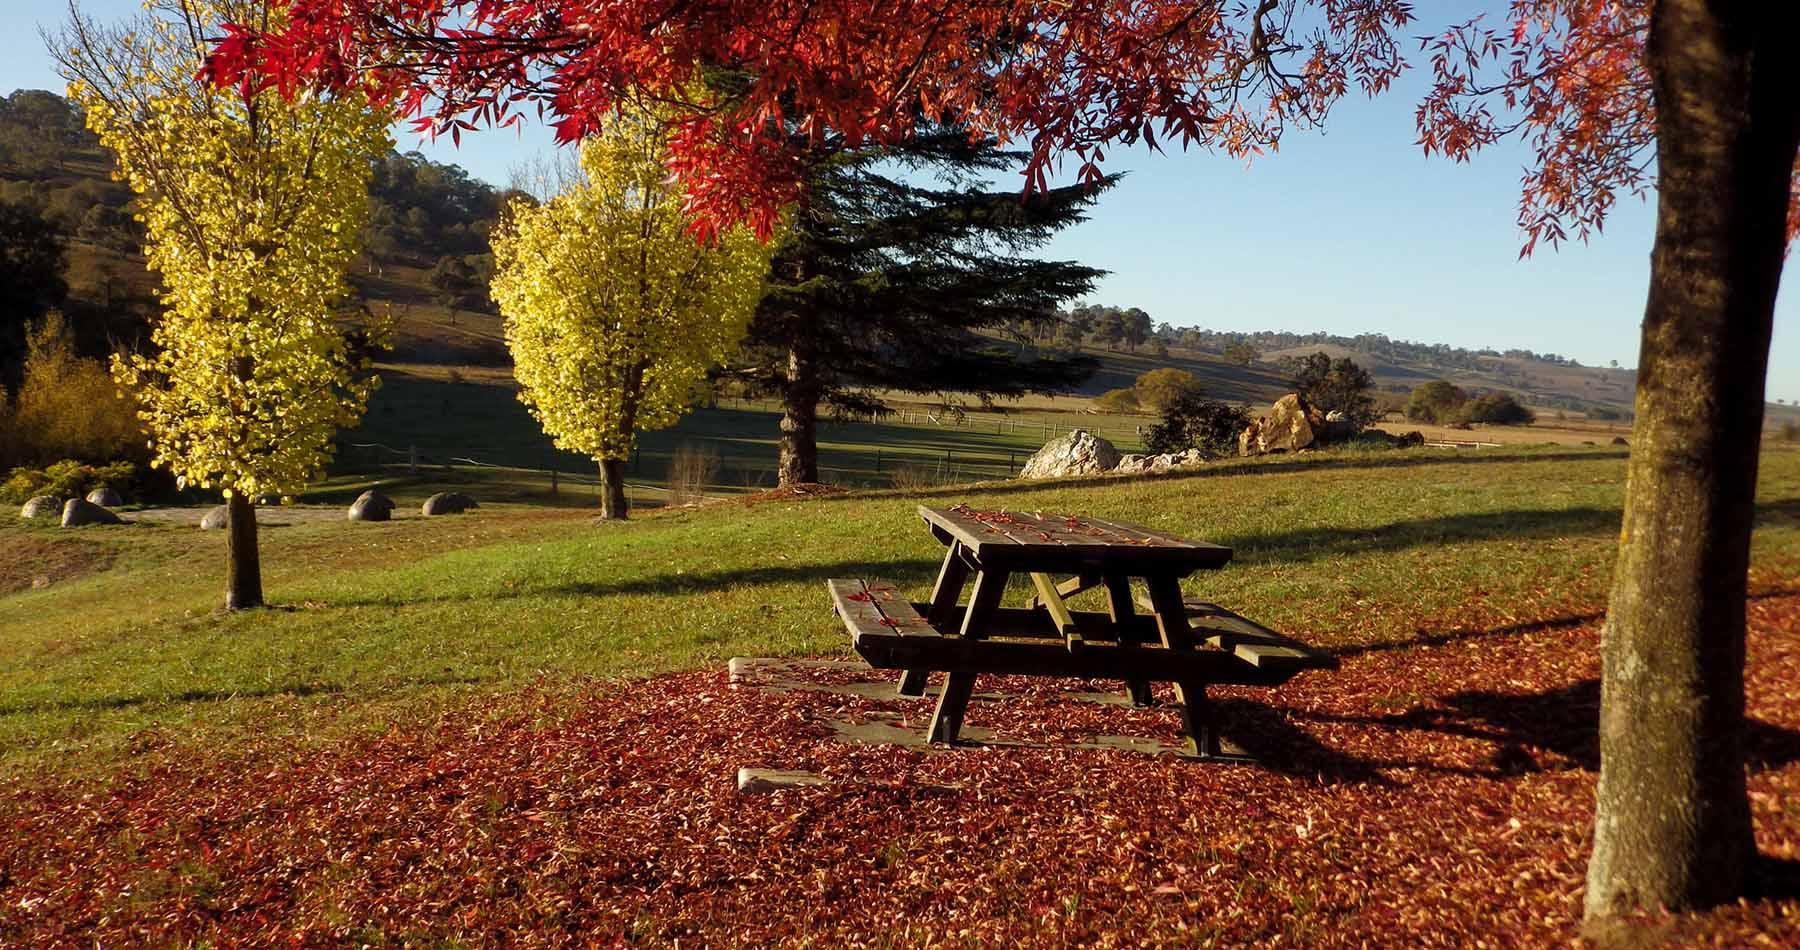 One of the many vantage points for viewing Autumn leaves in Walcha